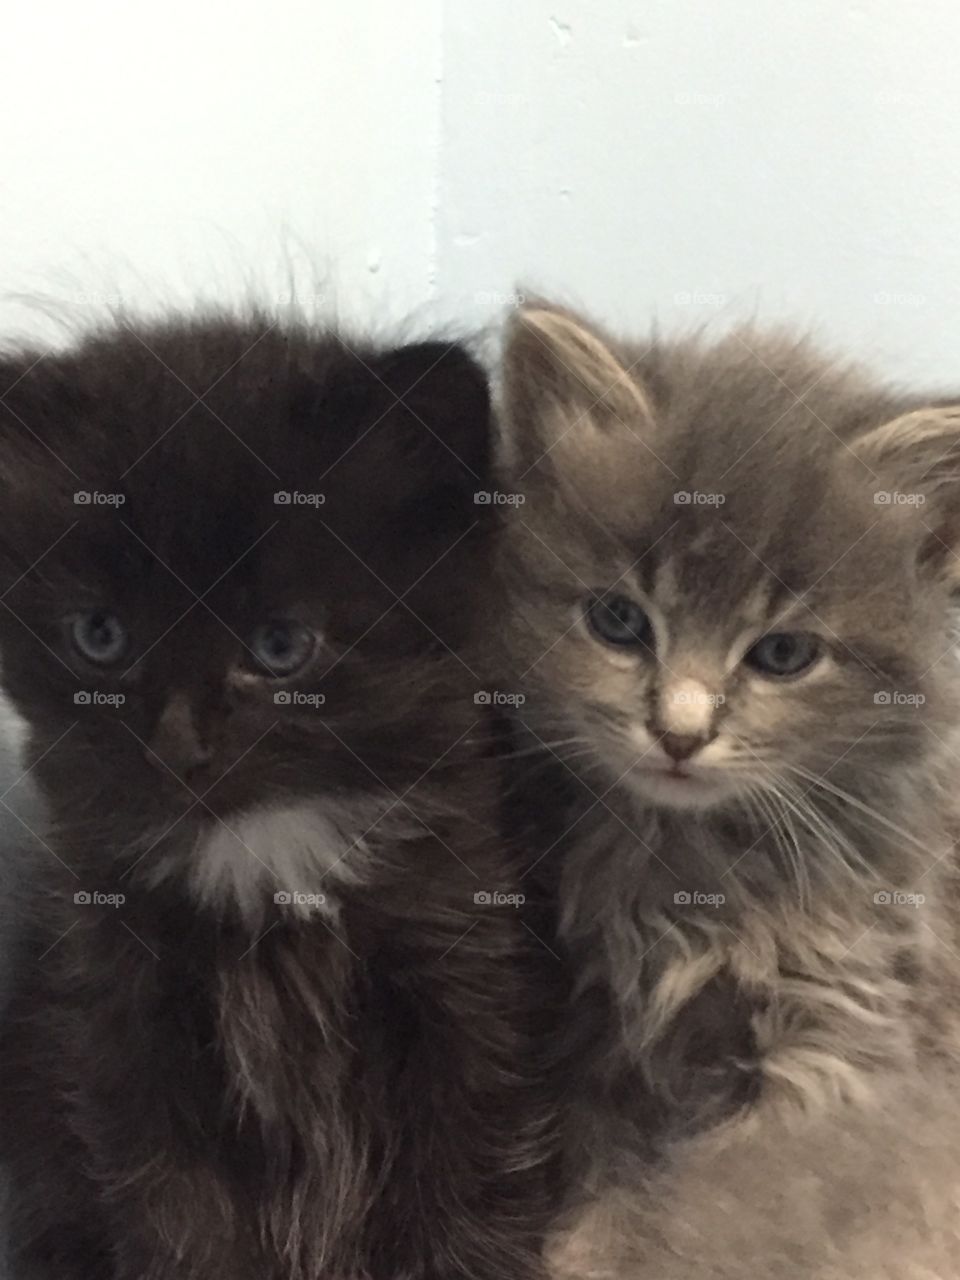 Two little, cute and fluffy kittens posing for their picture.